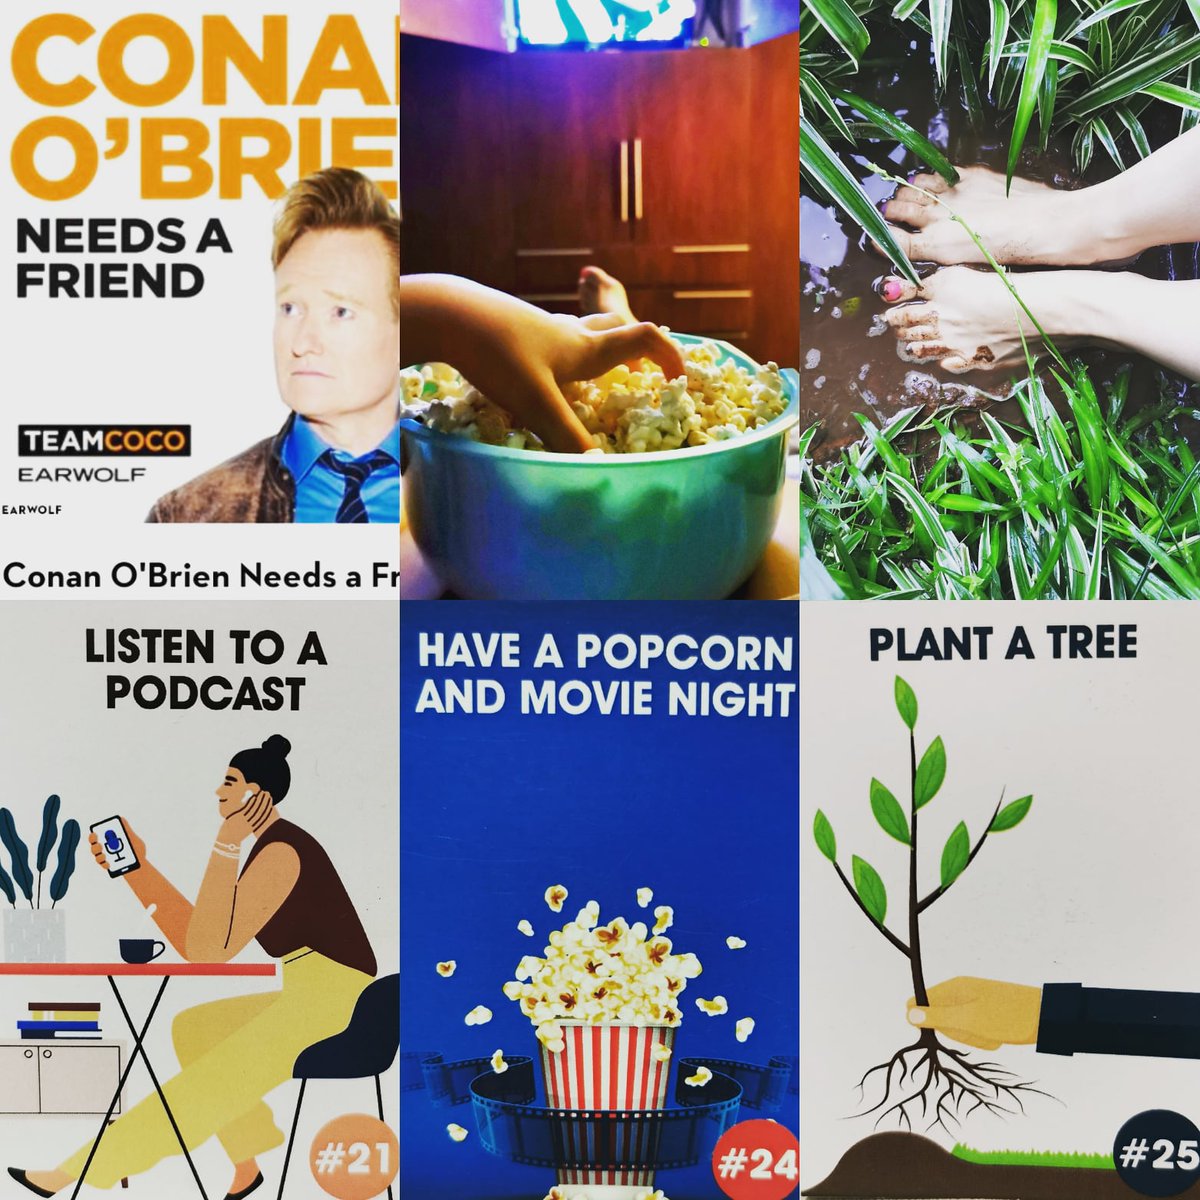 Playing catch up..(because COVID, because work, because kids, because....life...)35 Days of Celebration 
Day 21 - Listen to a podcast with @makosiaudit
Day 24 - Have a popcorn and movie night
Day 25 - Getting hands (and feet) dirty and Plant a tree.

#top35u35 #celebratesuccess